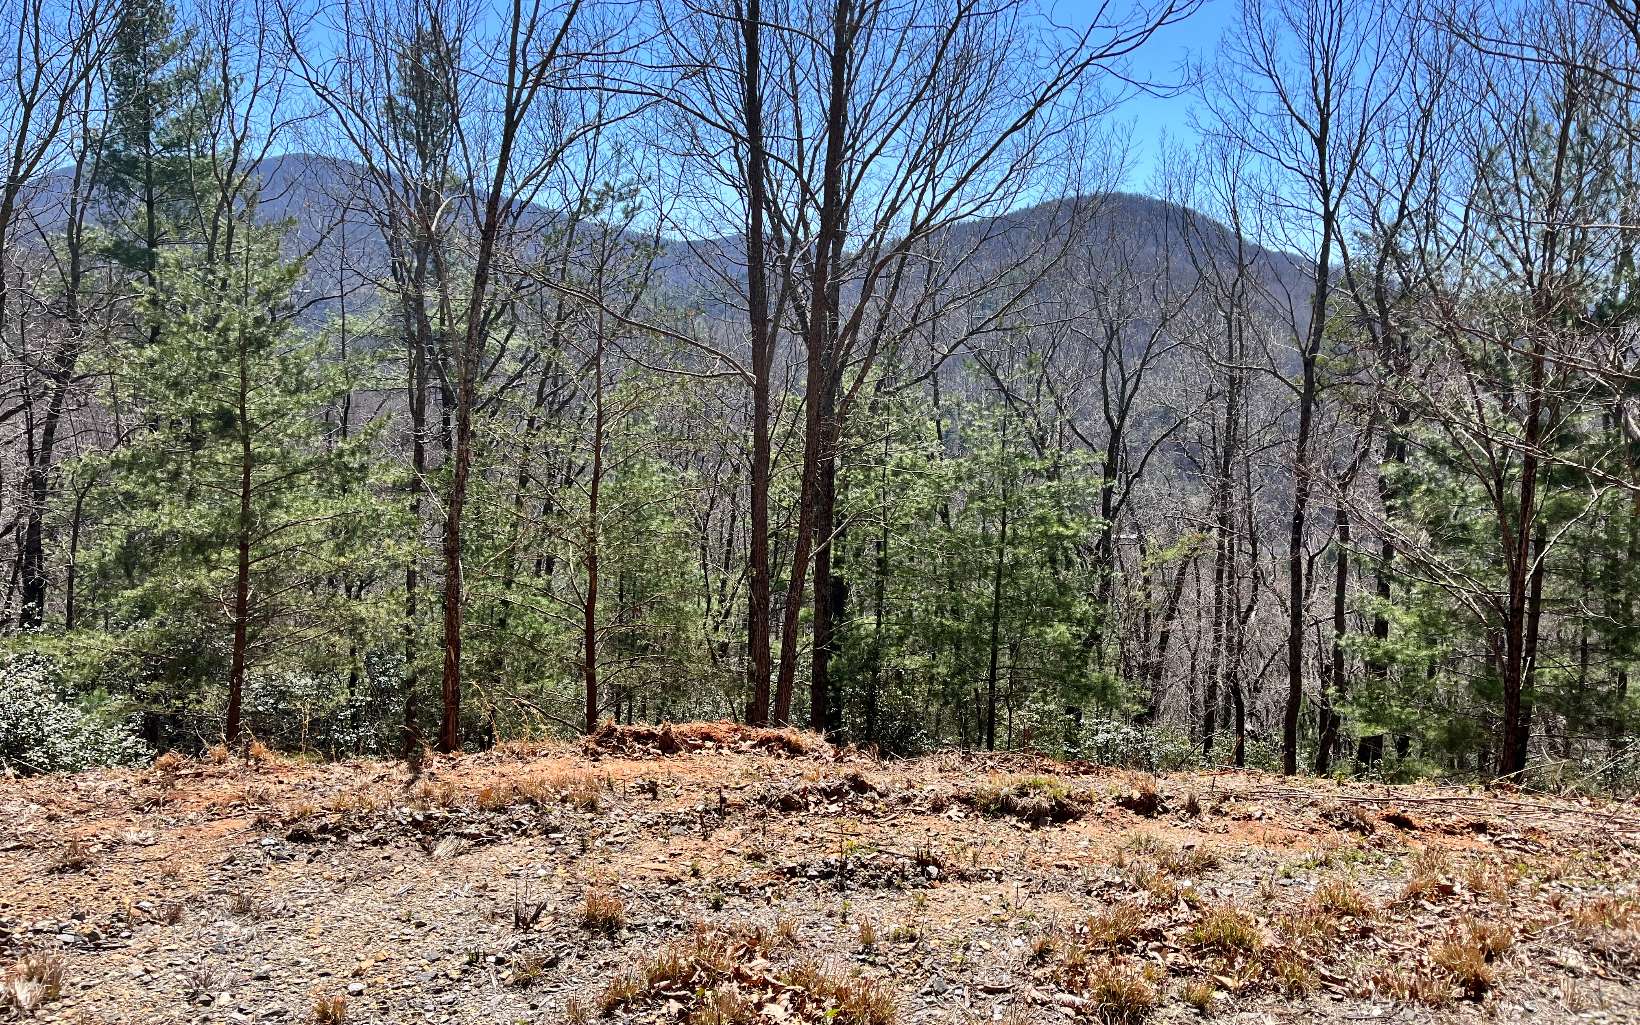 ***INVESTOR ALERT**** ACREAGE TO SUBDIVIDE OR HAVE YOUR OWN MOUNTAIN PARADISE IN THE NORTH GA MOUNTAIN. UNRESTRICTED, POWER ON PROPERTY. MOUNTIAN VIEWS. BORDERED BY USFS